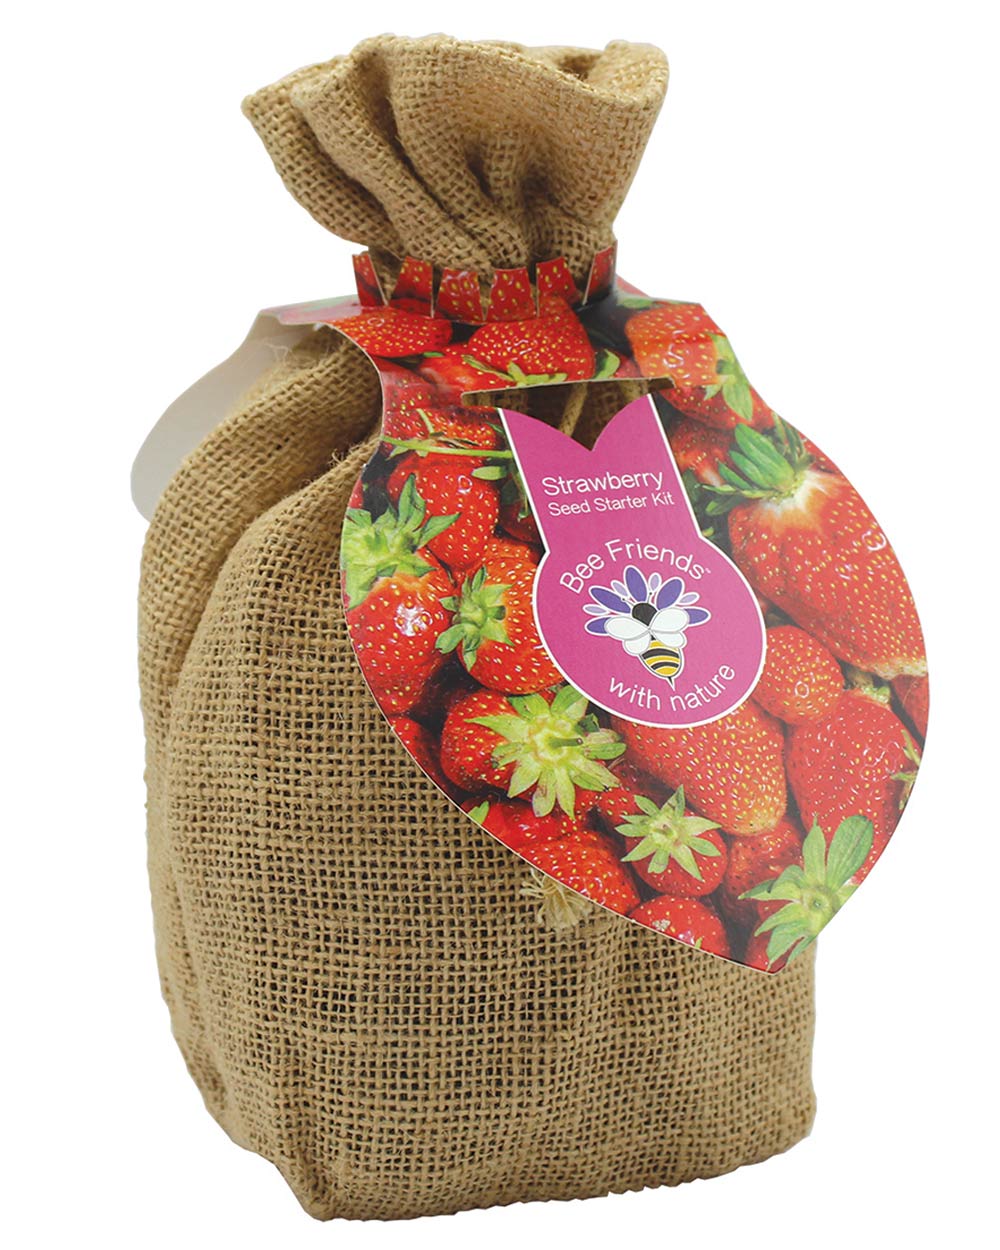 Strawberry starter kit displayed in a jute bag on a white background